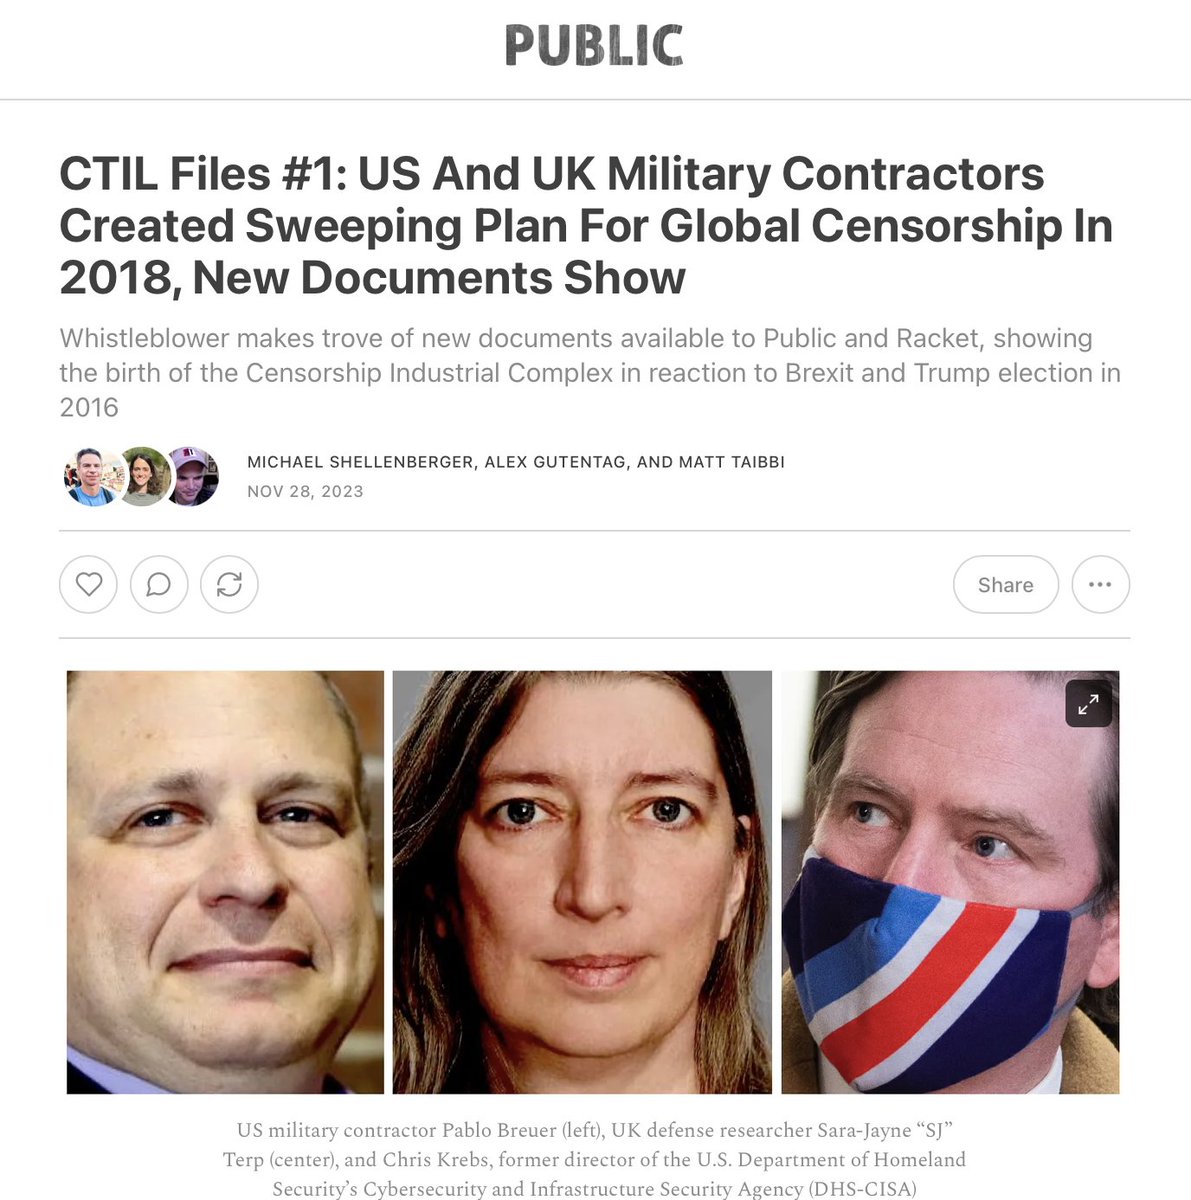 THE CTIL FILES #1 Many people insist that governments aren't involved in censorship, but they are. And now, a whistleblower has come forward with an explosive new trove of documents, rivaling or exceeding the Twitter Files and Facebook Files in scale and importance.